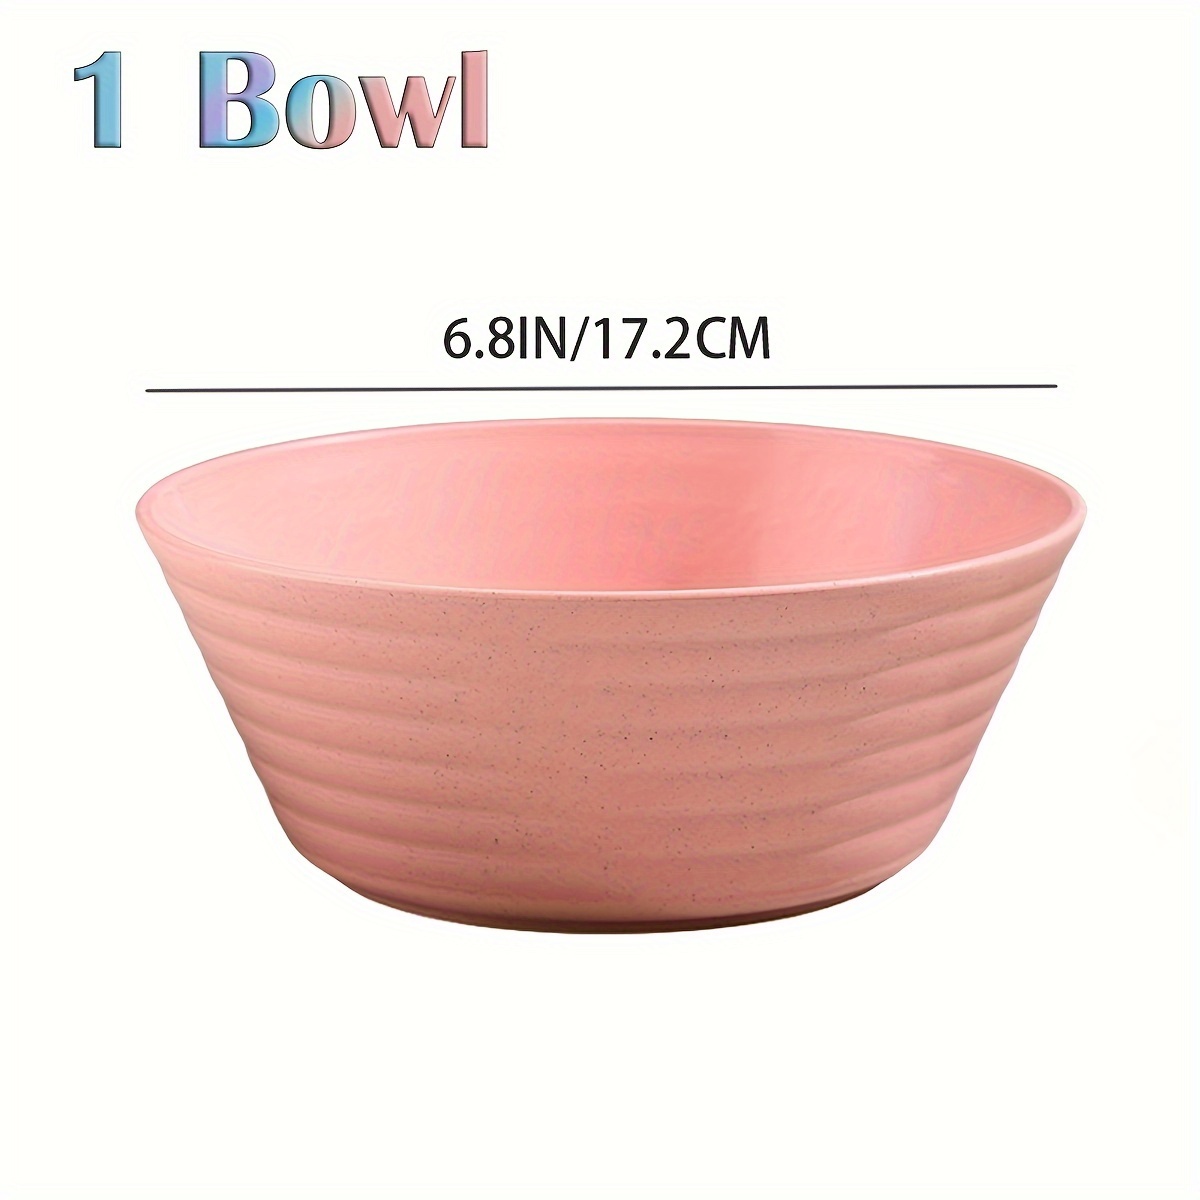 Wheat Bowl Set with Lid,Airtight Bowl Food Storage Containers, BPA-Free, Microwave, Oven, Freezer and Dishwasher,Easy to clean,3Pieces, Pink